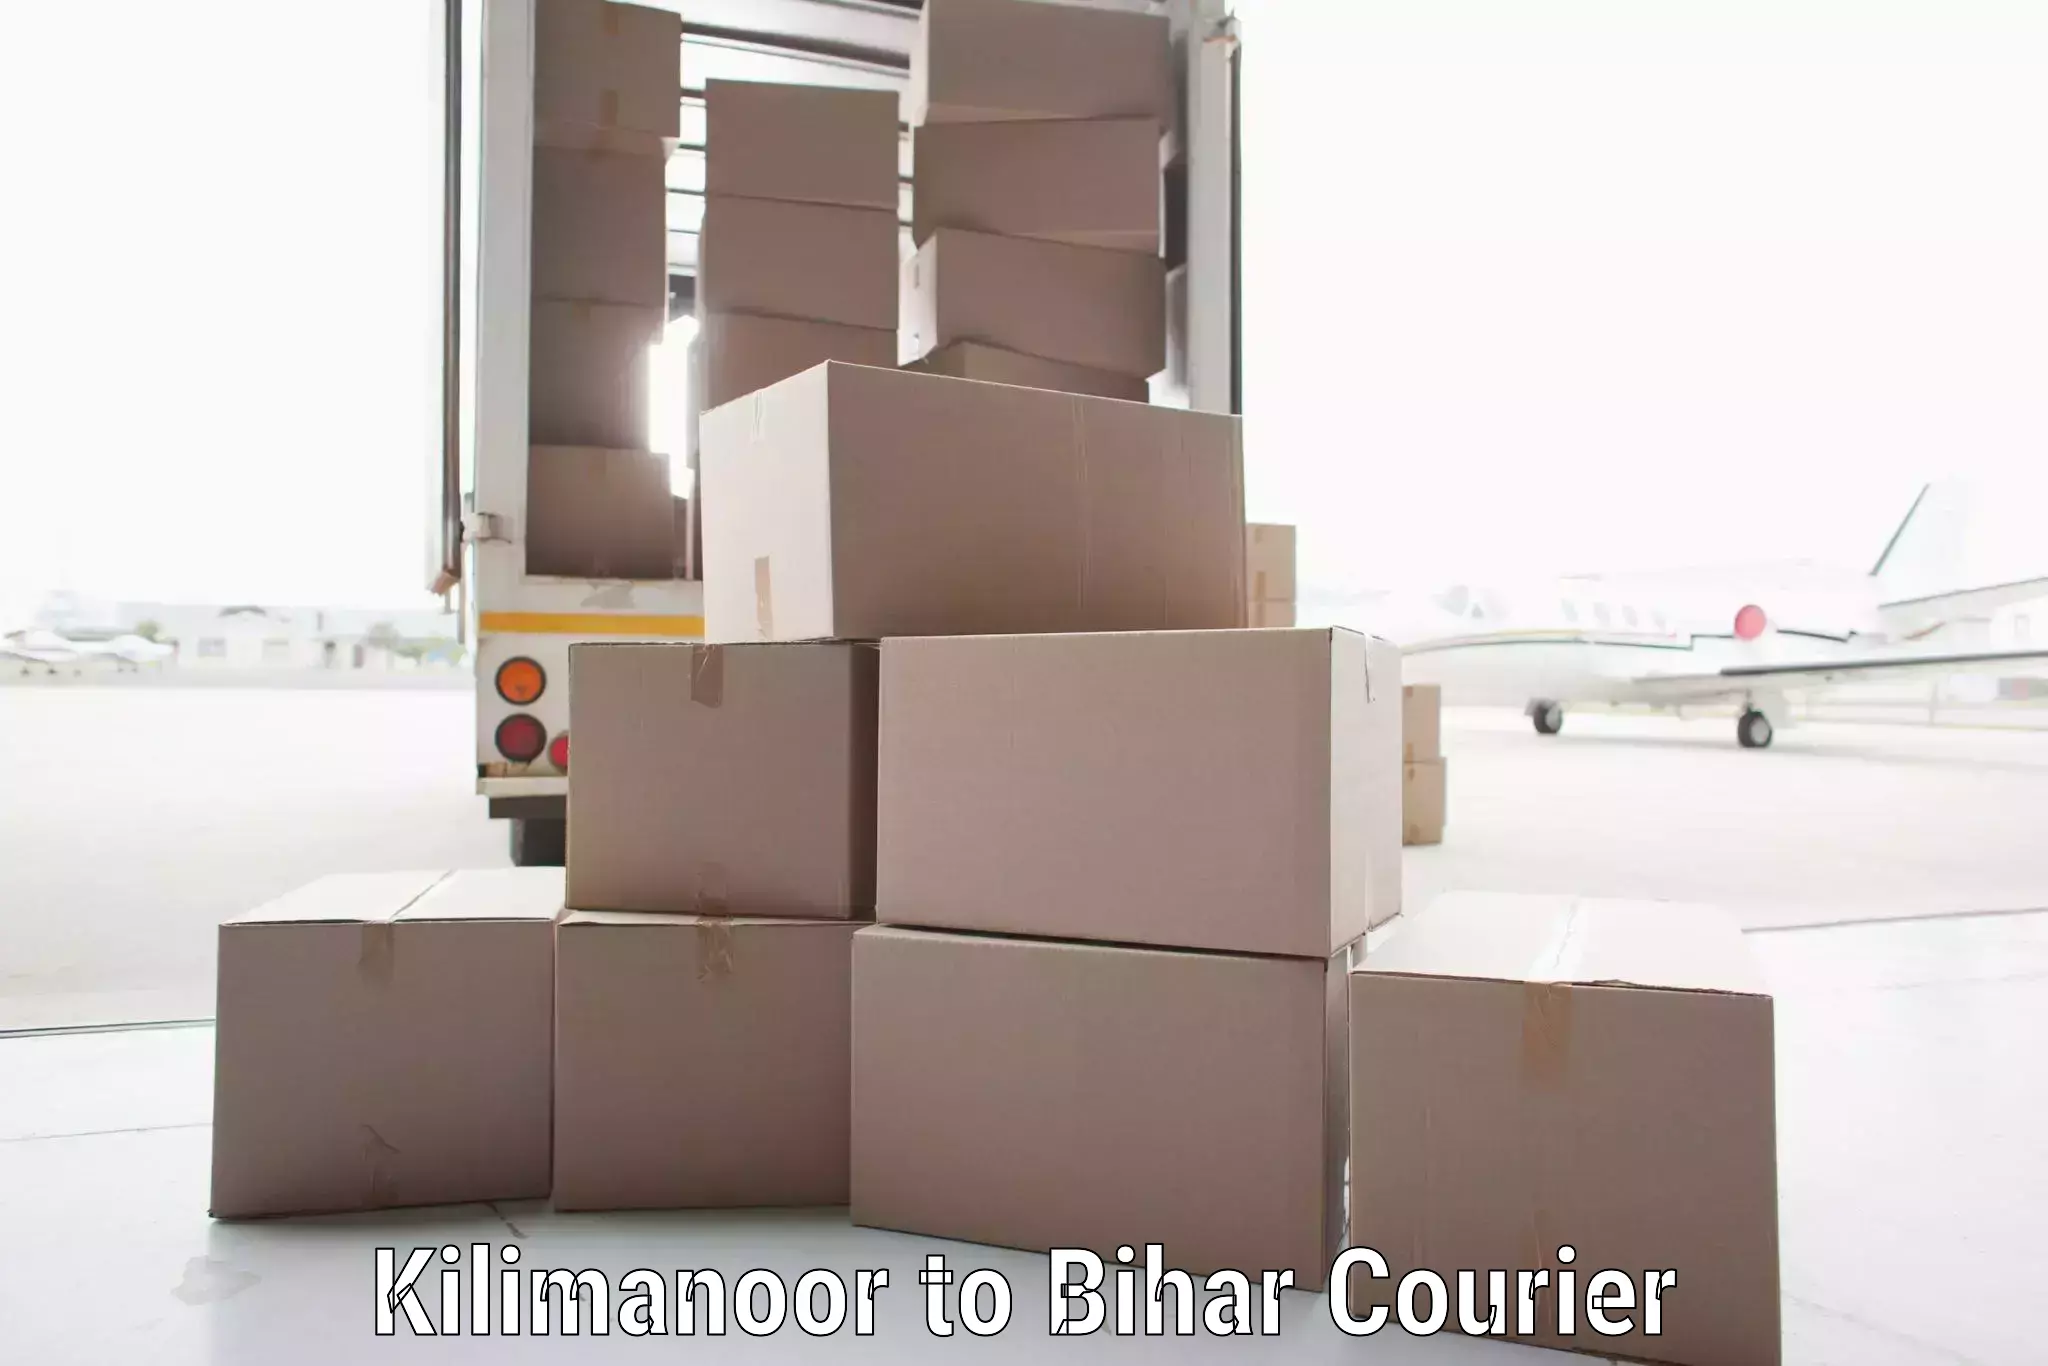 Full-service courier options Kilimanoor to Aurai